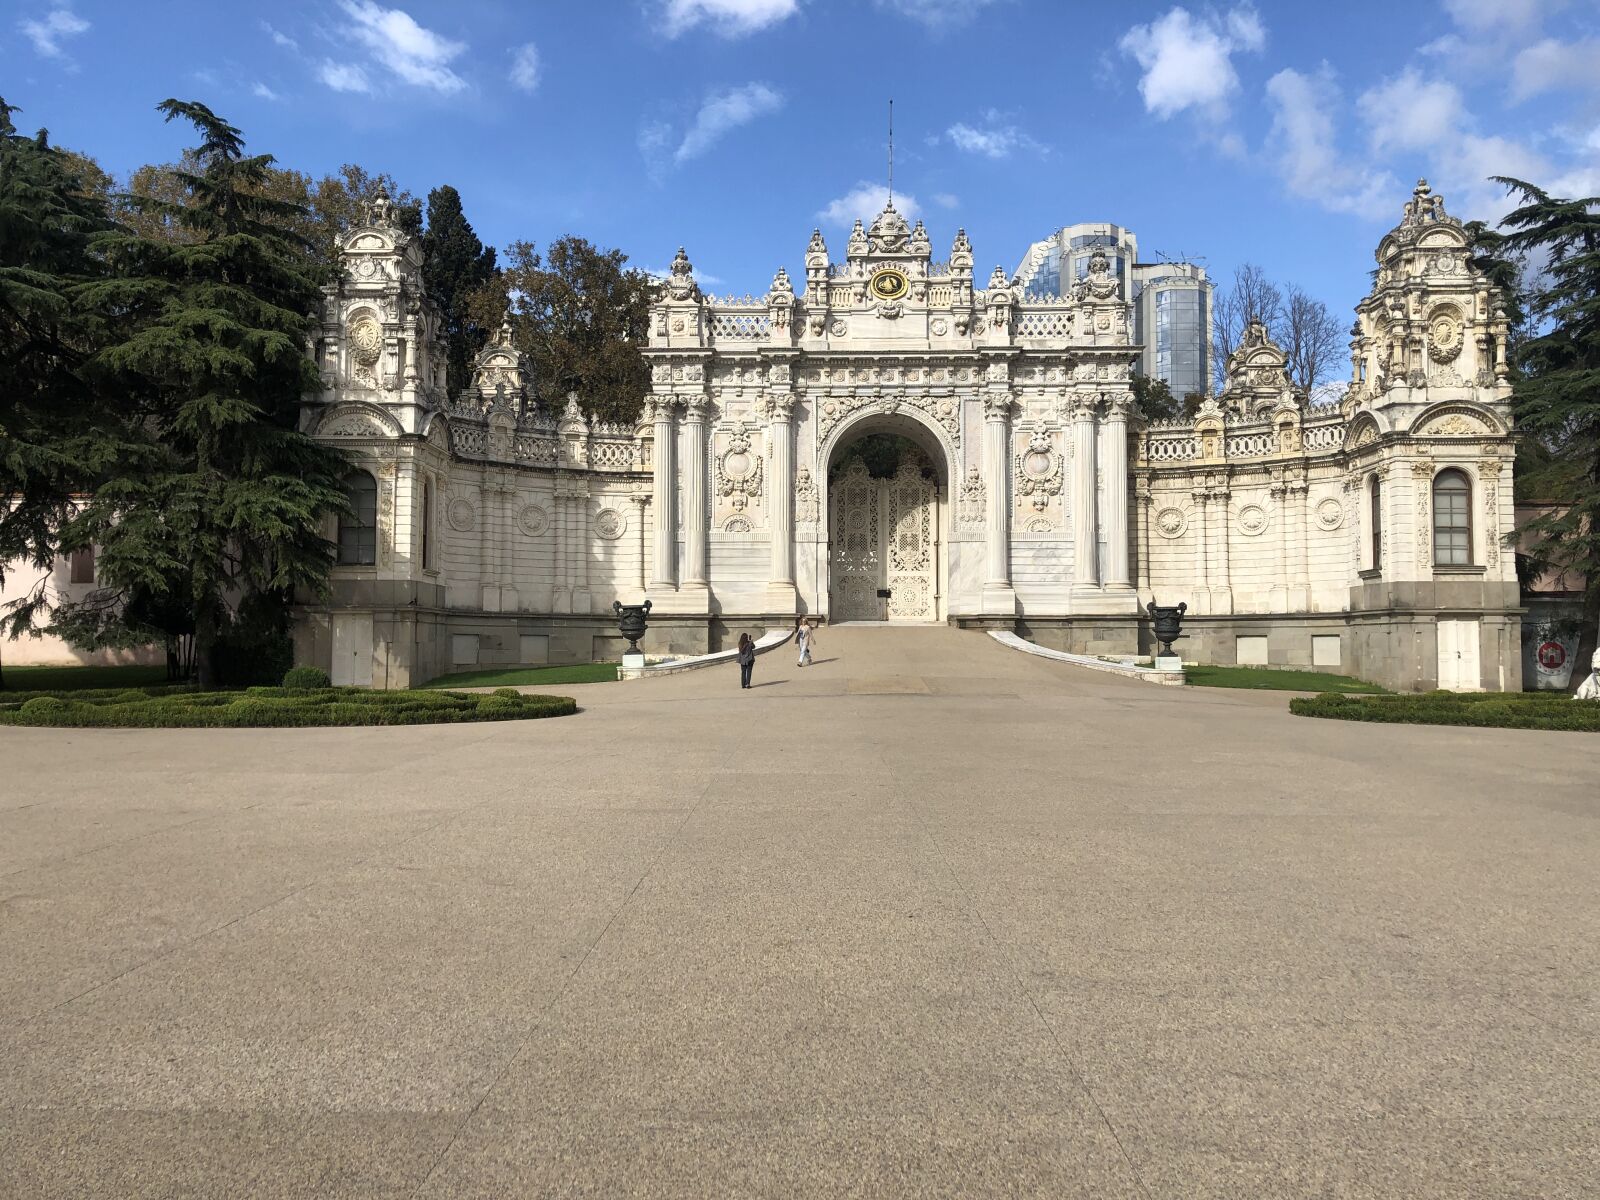 iPhone 8 Plus back dual camera 3.99mm f/1.8 sample photo. Dolmabahçe palace İstanbul photography